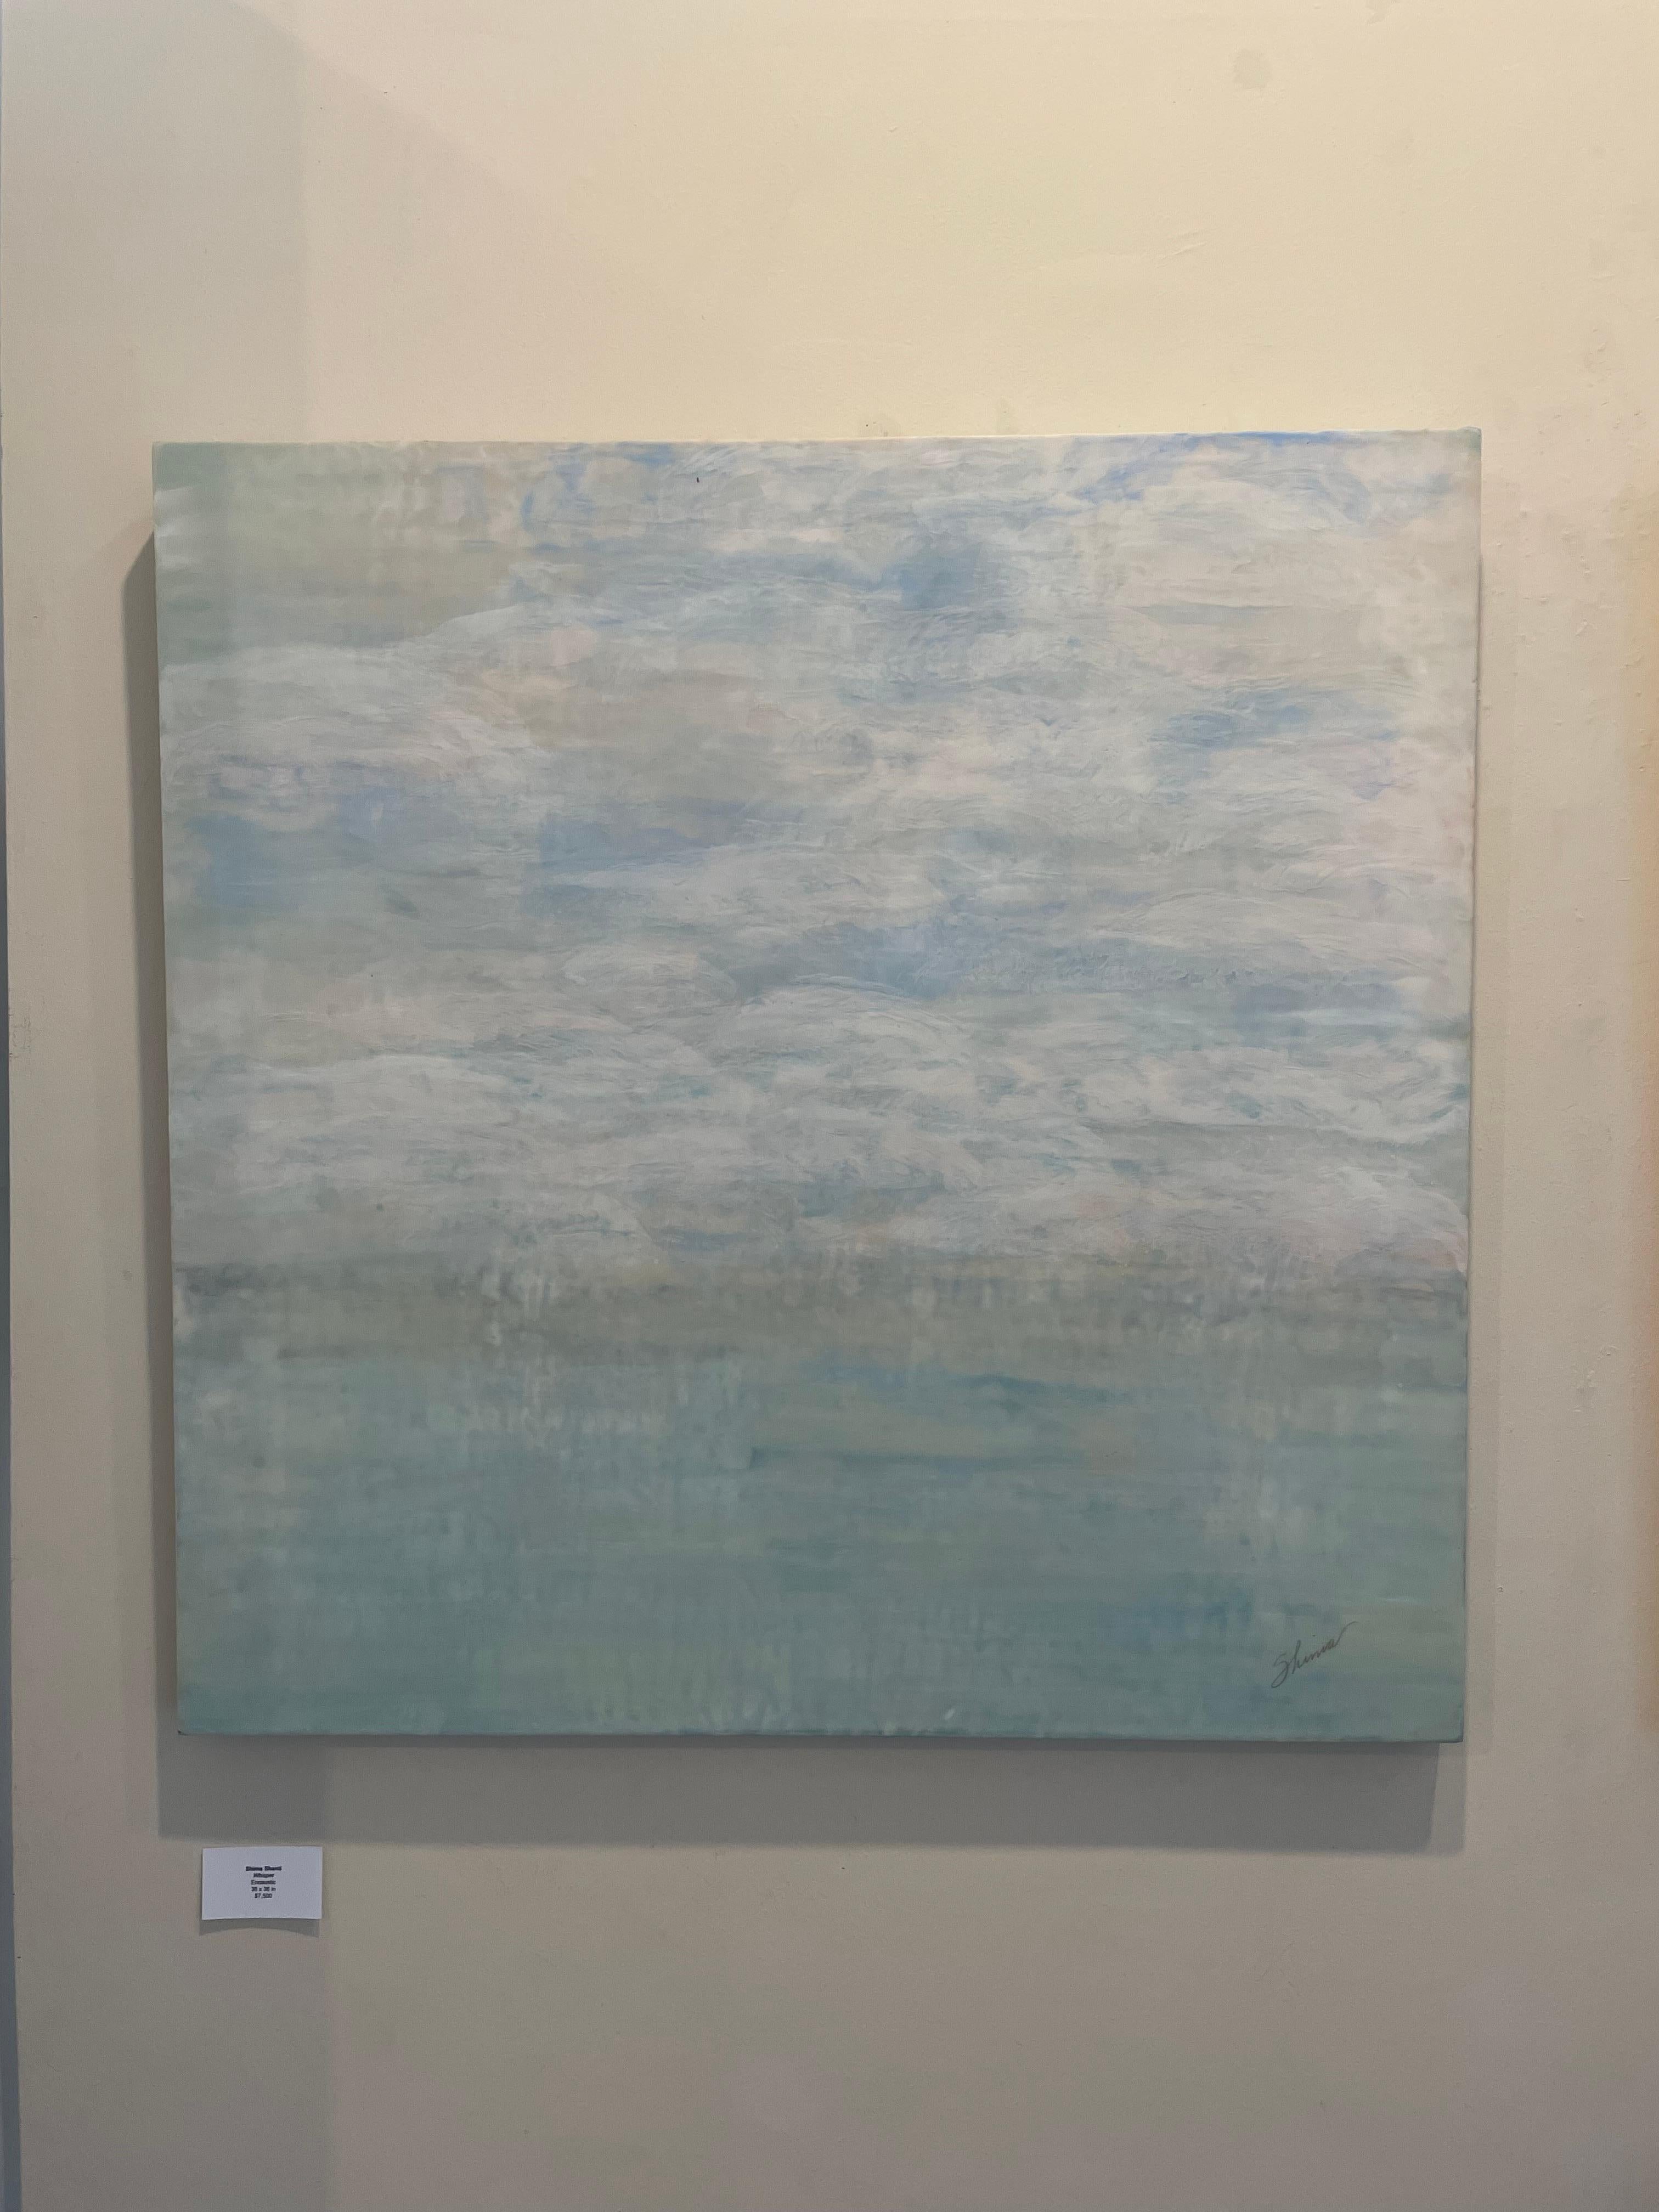 Shima Shanti created the original painting from encaustic, which is the layering of wax. Her encaustic paintings inspired her to treasure imperfections and the spontaneity of life. Her signature is placed on the bottom right of the painting.